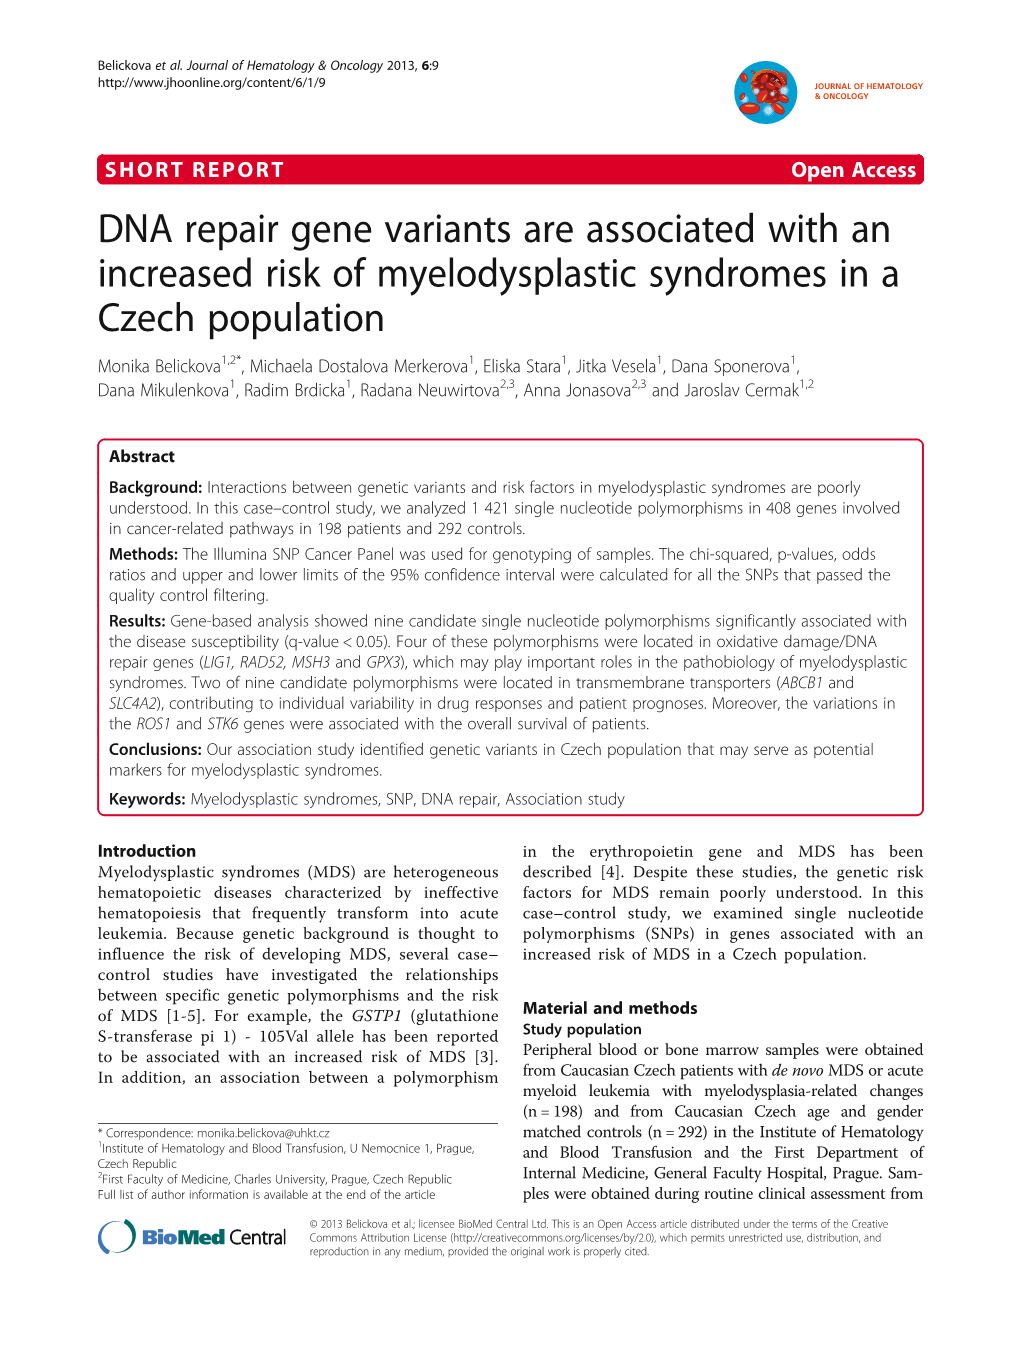 DNA Repair Gene Variants Are Associated with an Increased Risk Of